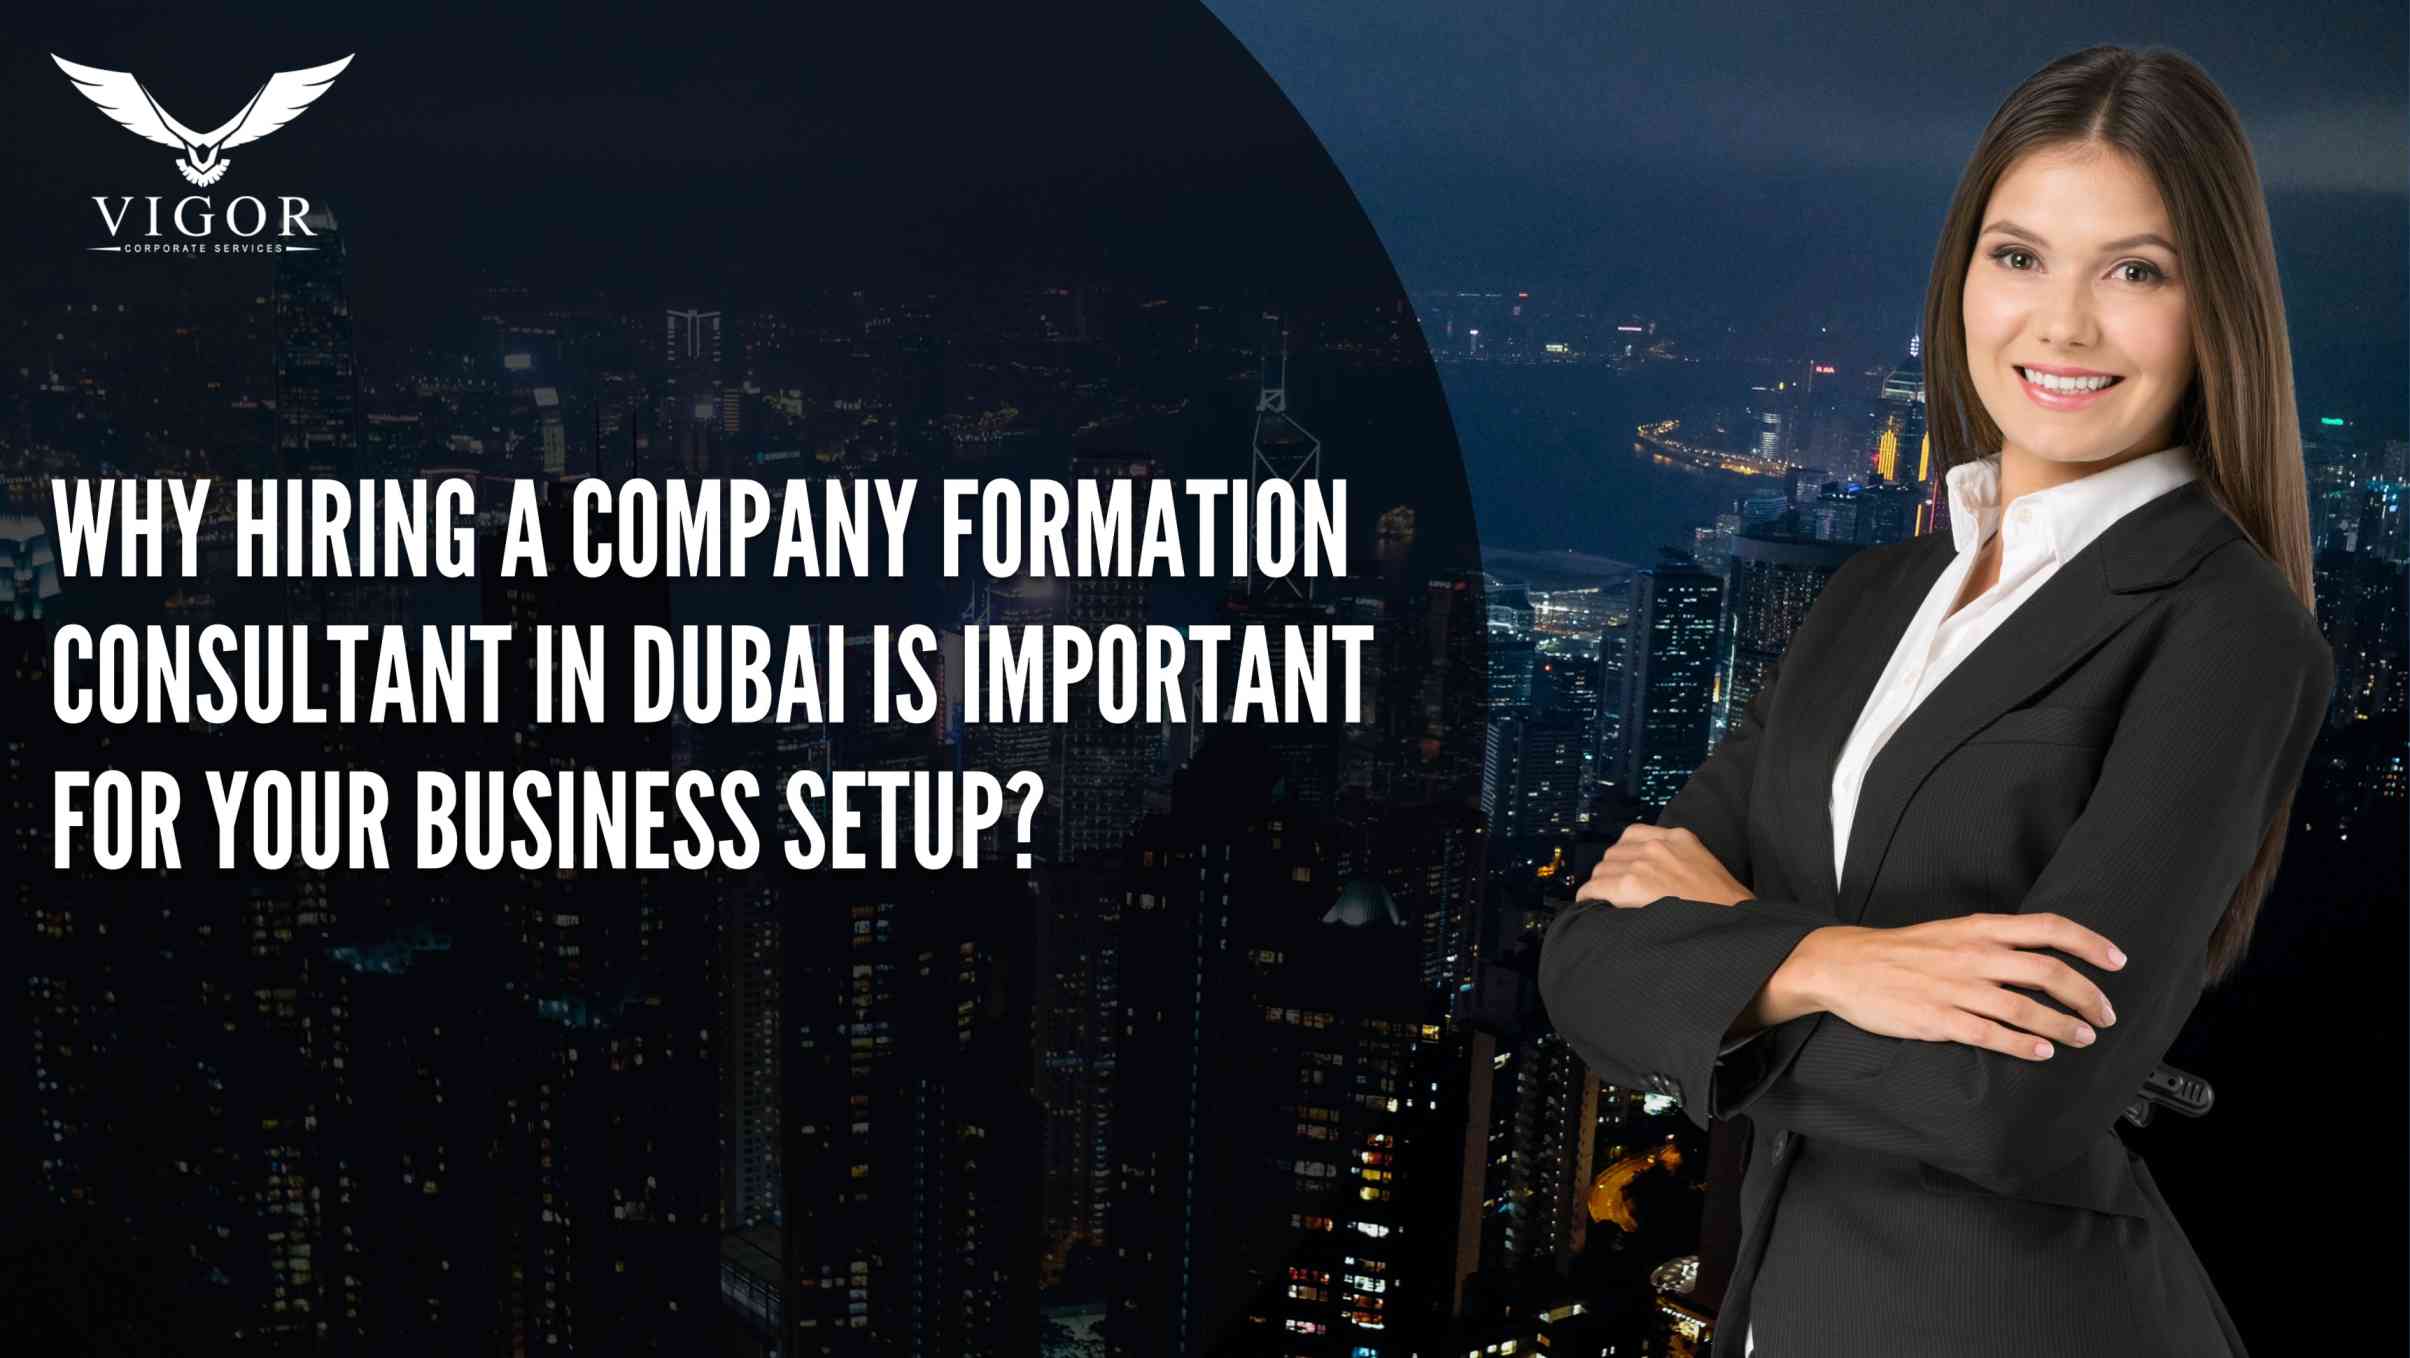 Why Hiring a Company Formation Consultant in Dubai is Important for Your Business Setup